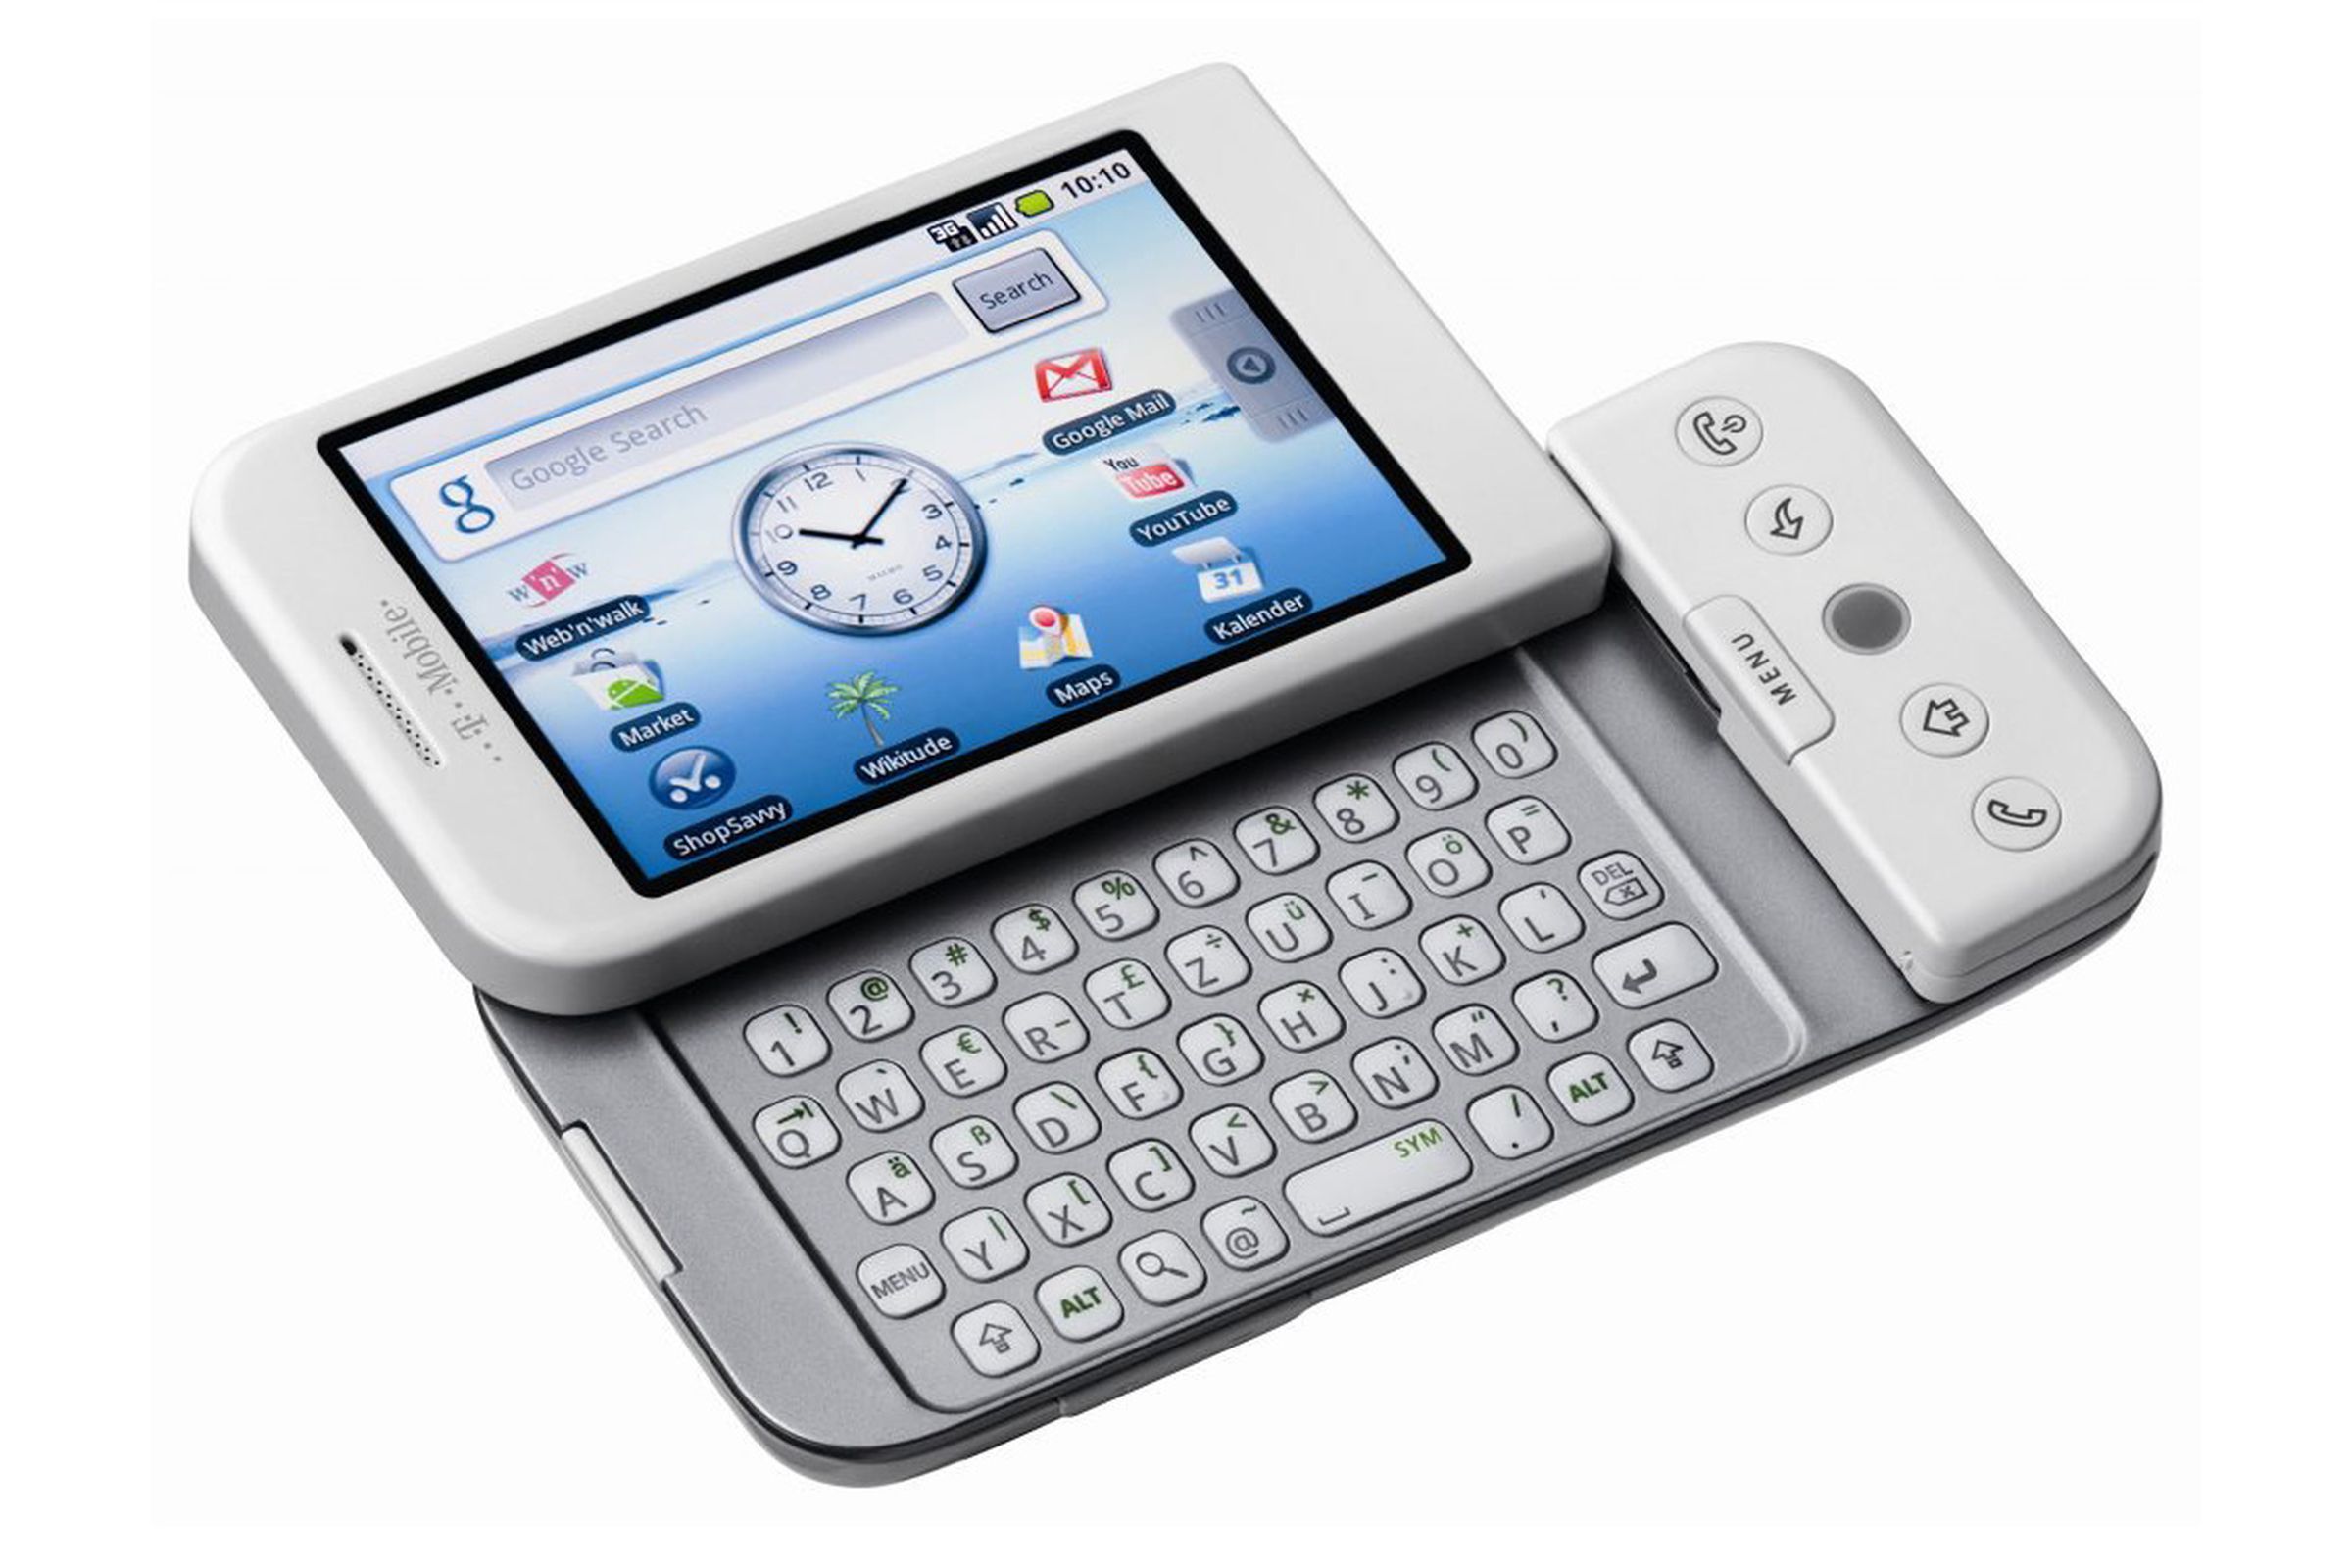 T-Mobile G1, the first Android phone